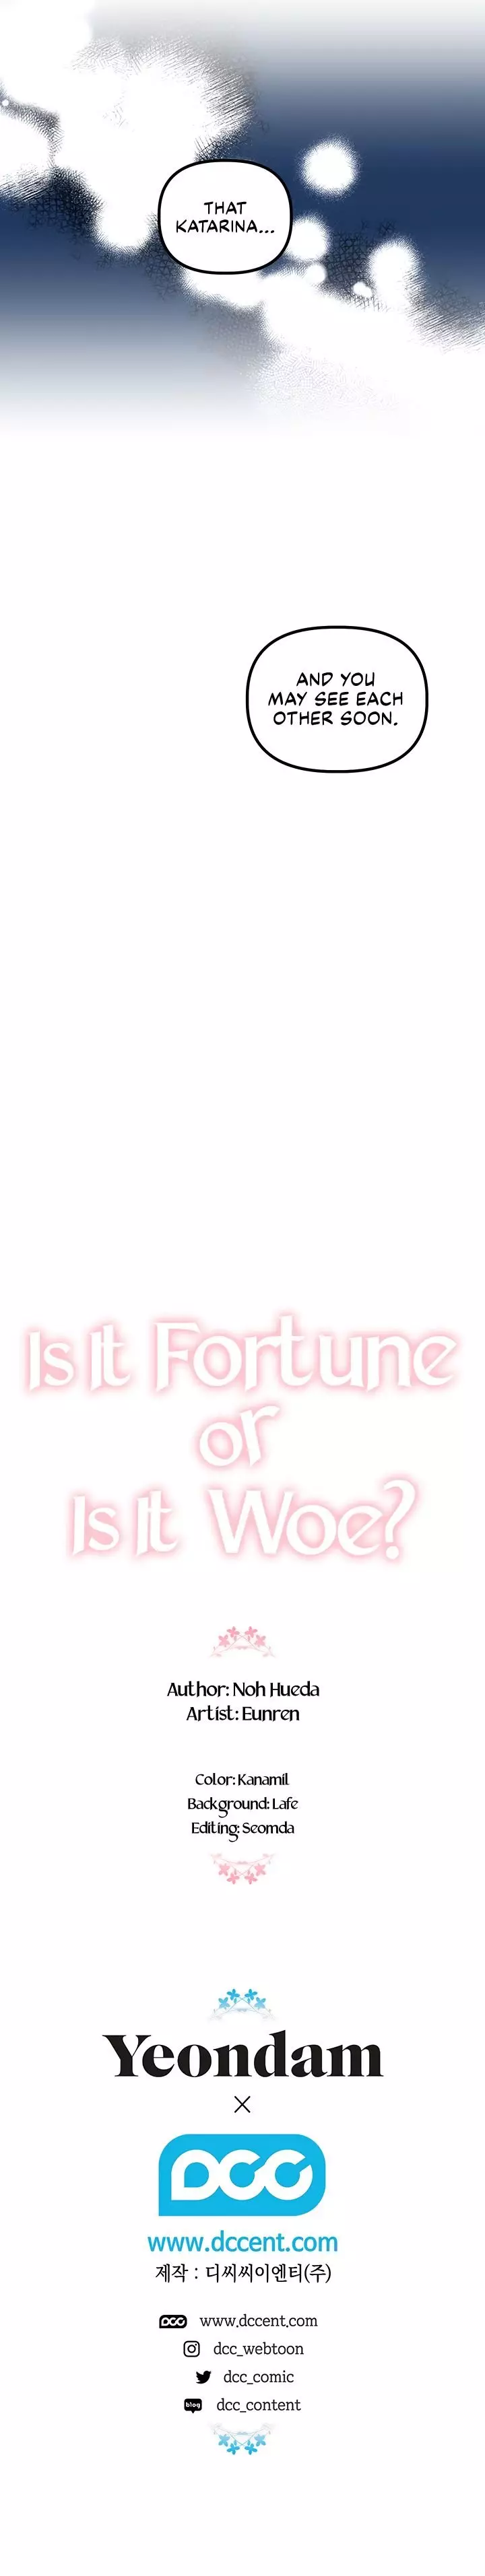 Is It A Fortune Or Is It A Woe? - 26 page 16